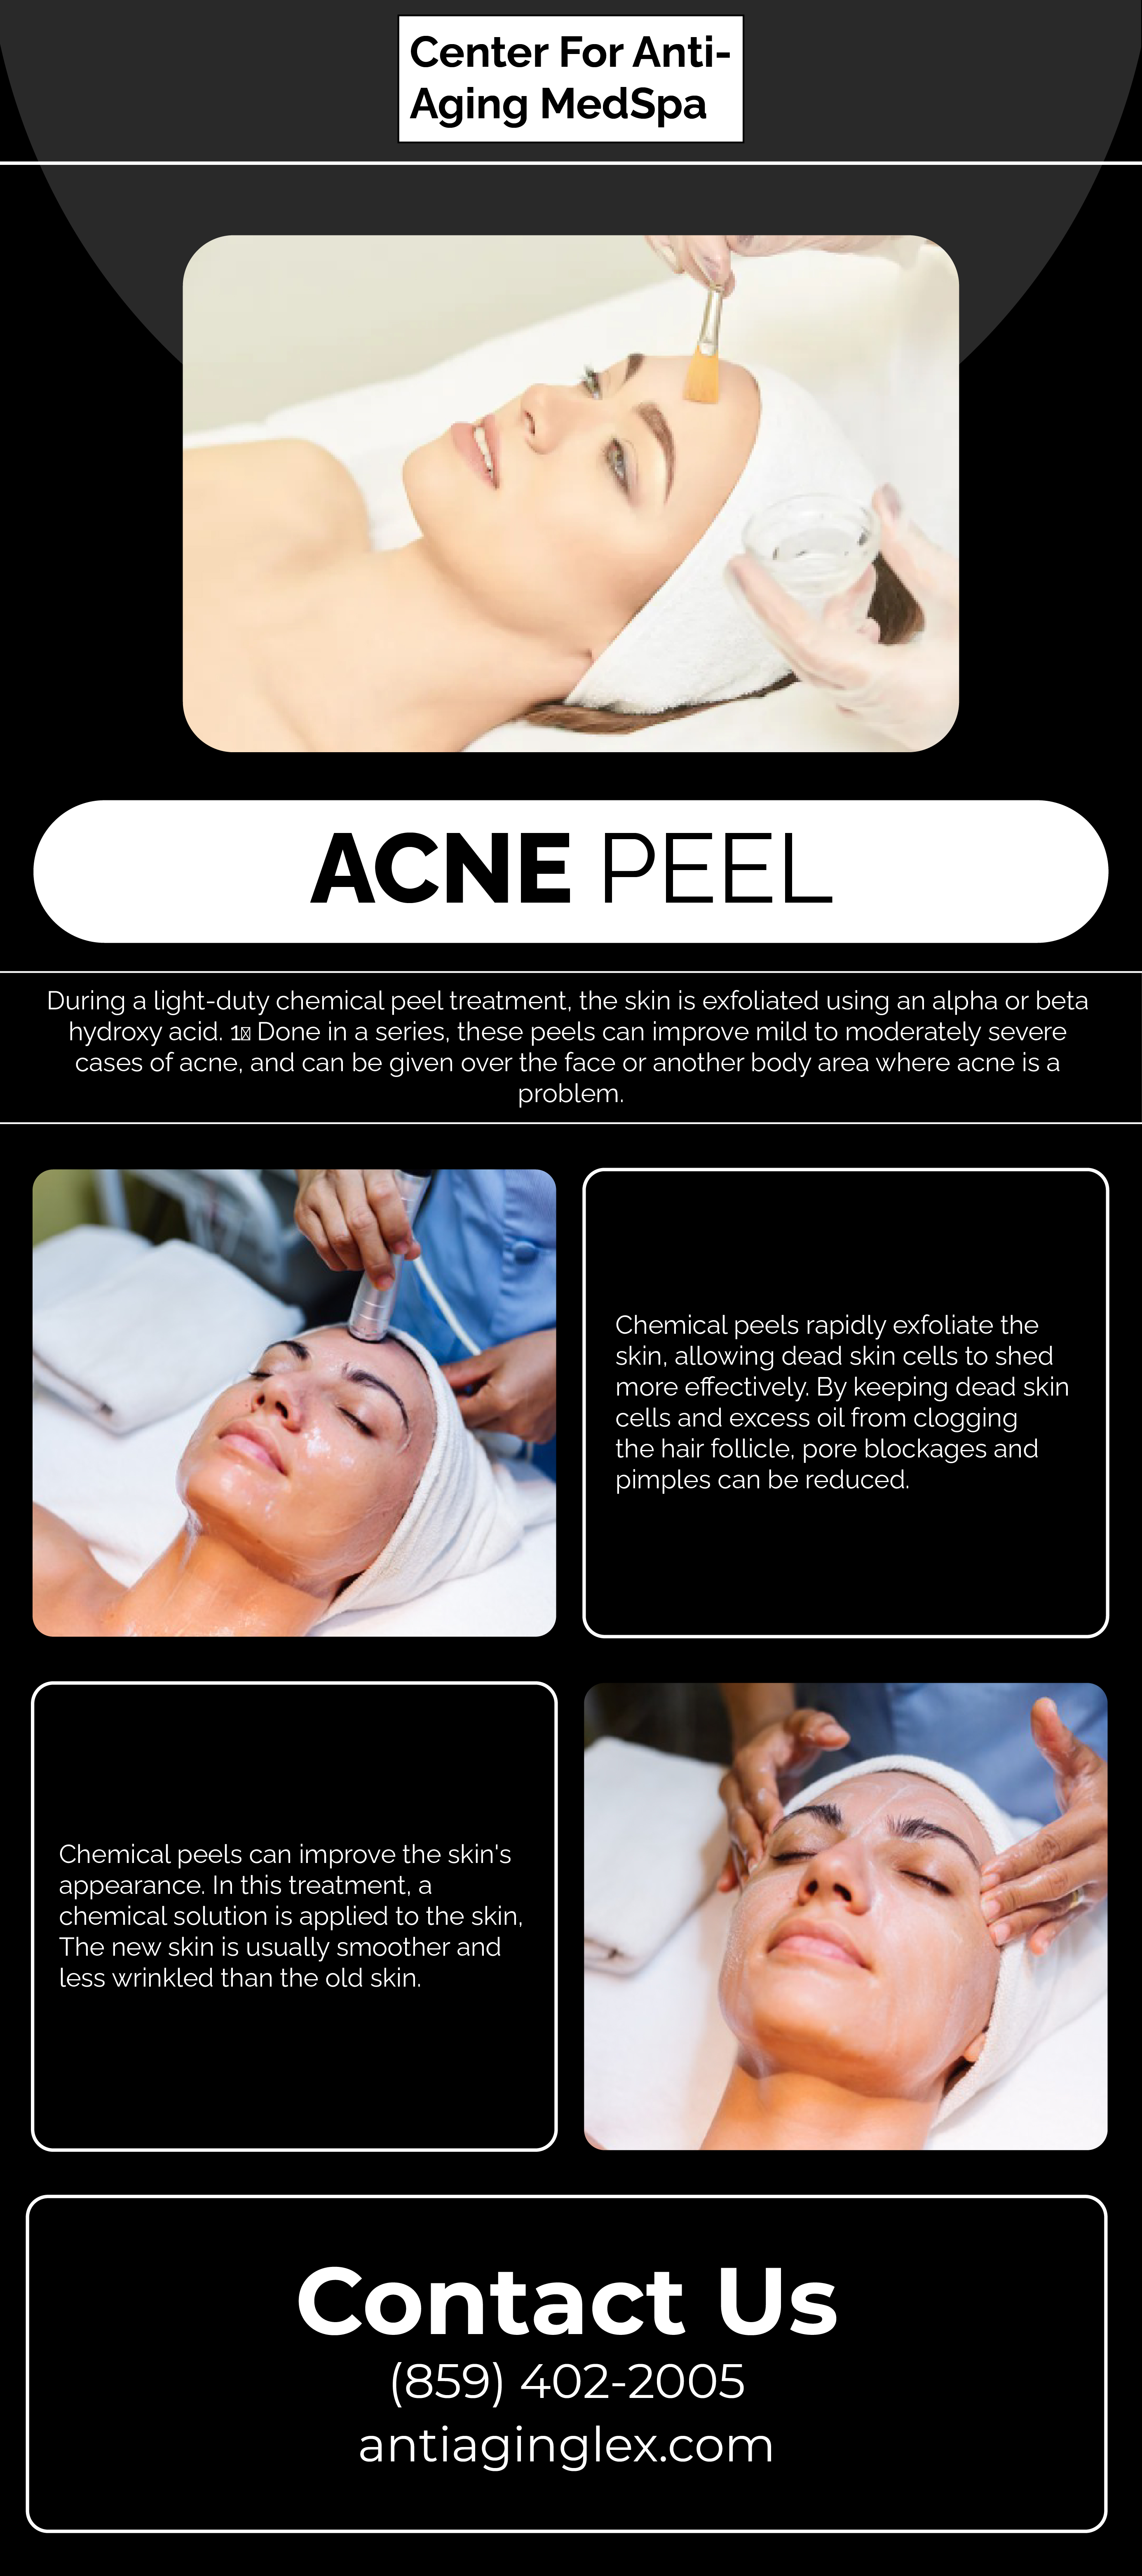 Professional acne pee treatment in USA at Centre For Anti-Aging Med Spa